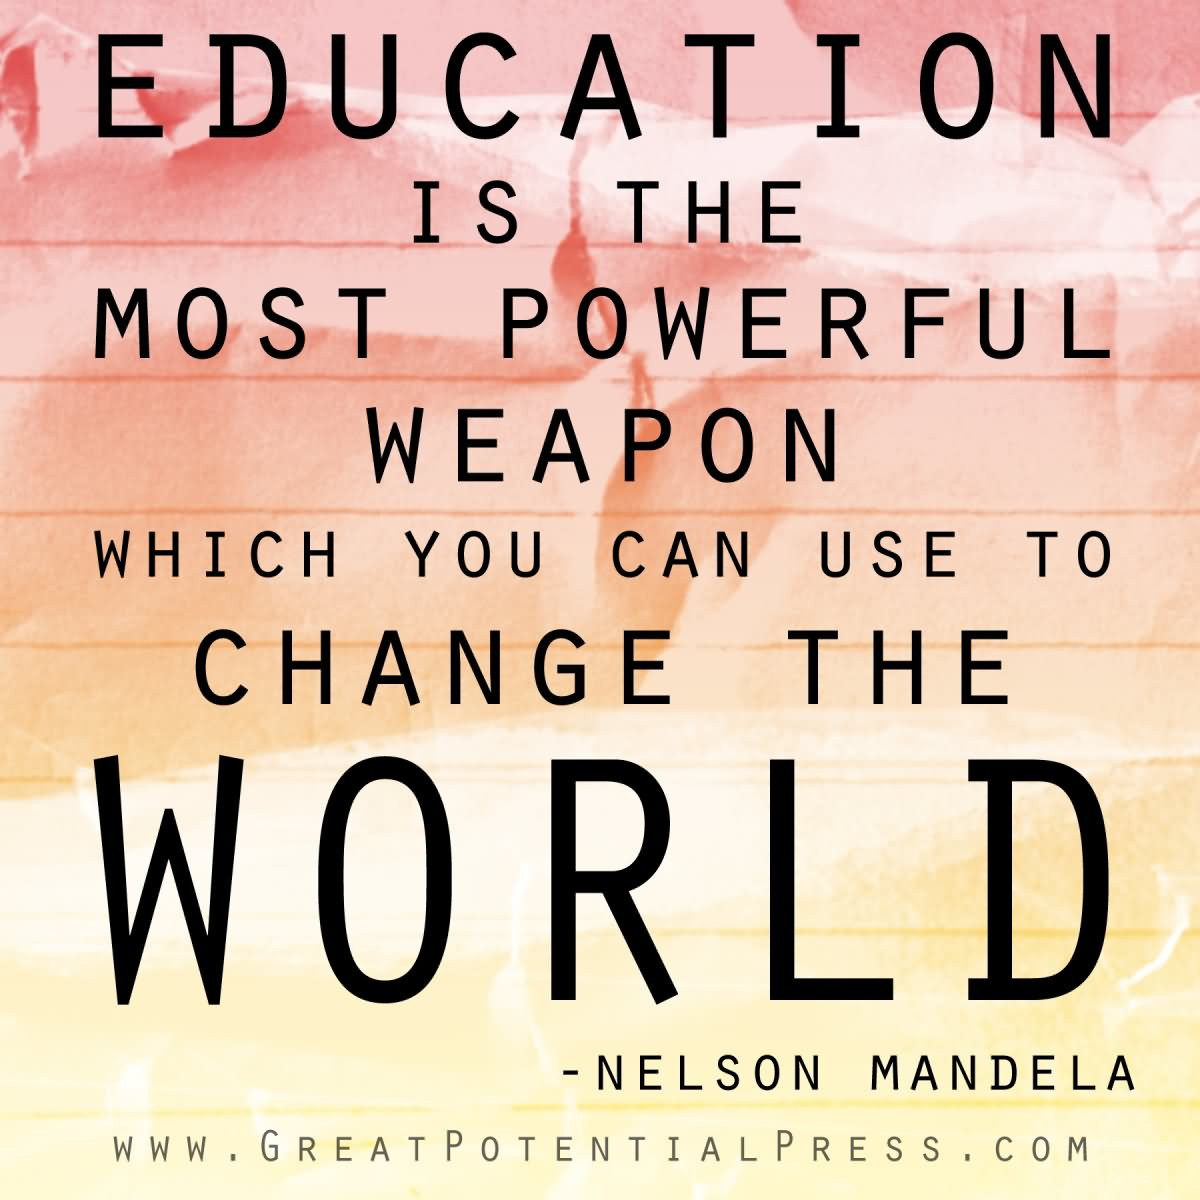 Nelson Mandela Quotes About Education
 Education is the most powerful weapon which you can use to